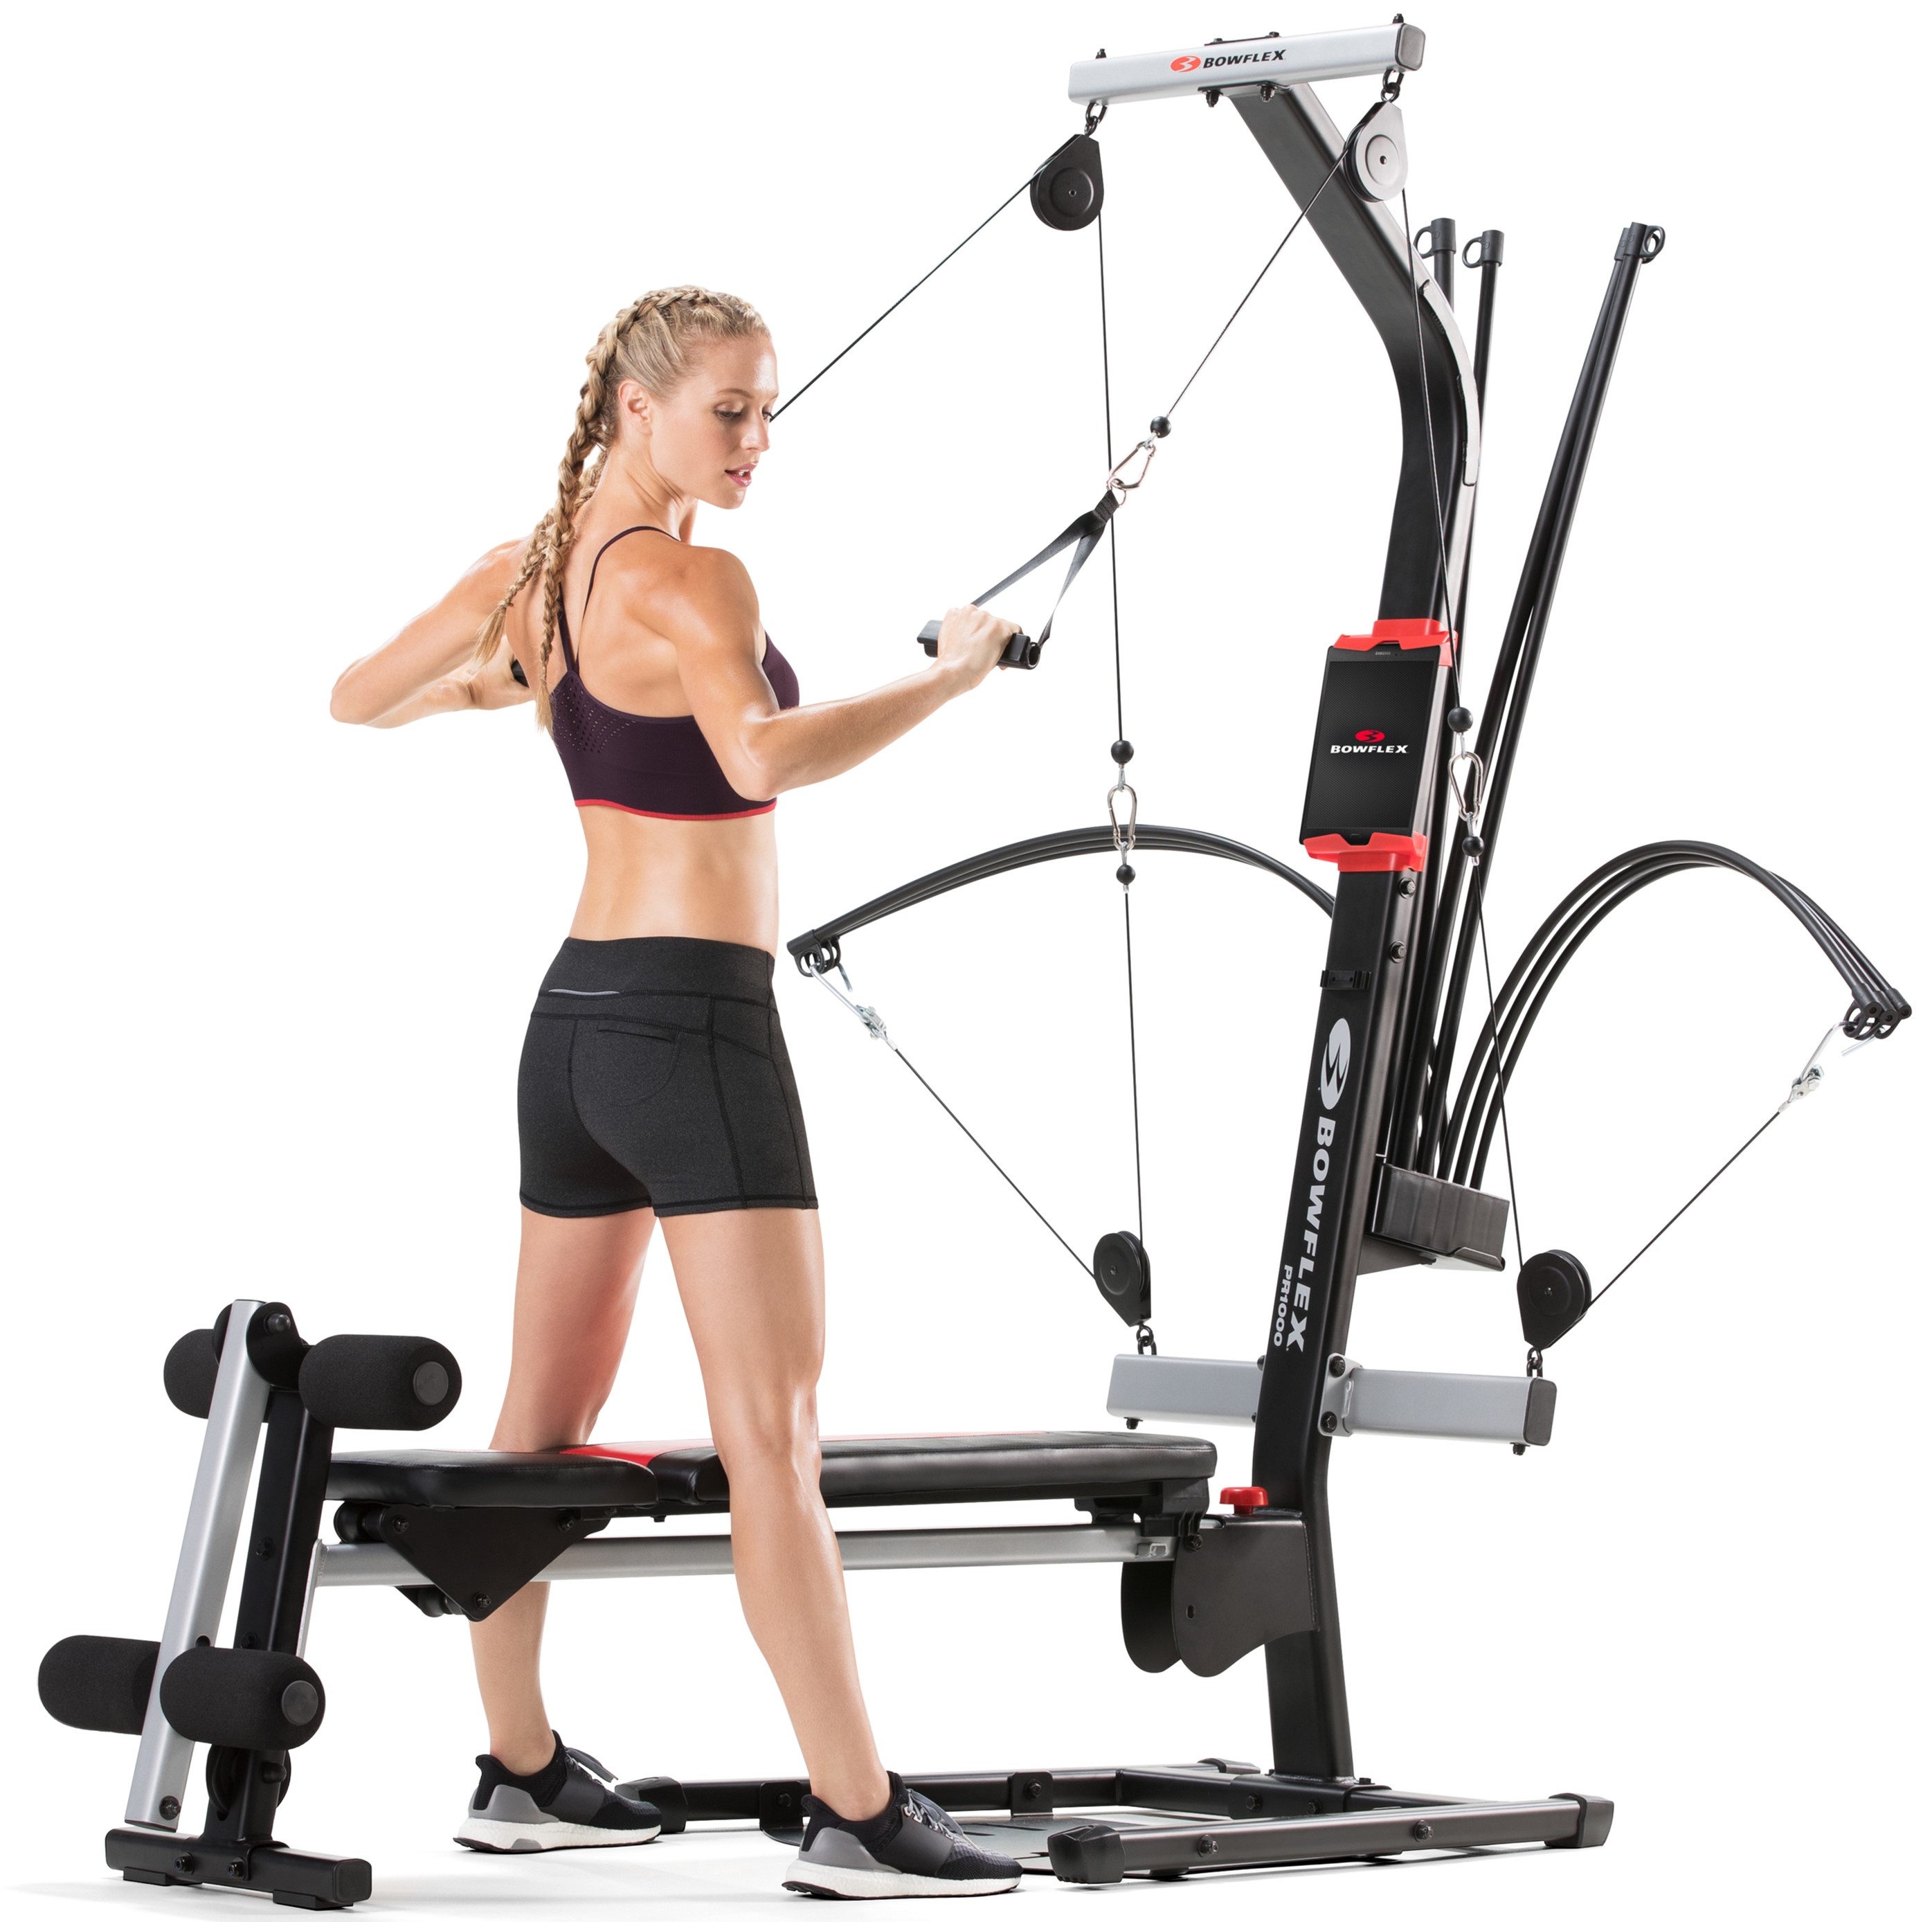 Bowflex PR1000 Home Gym Weight Lifting Aerobic Rowing and Vertical Folding Bench - image 1 of 10